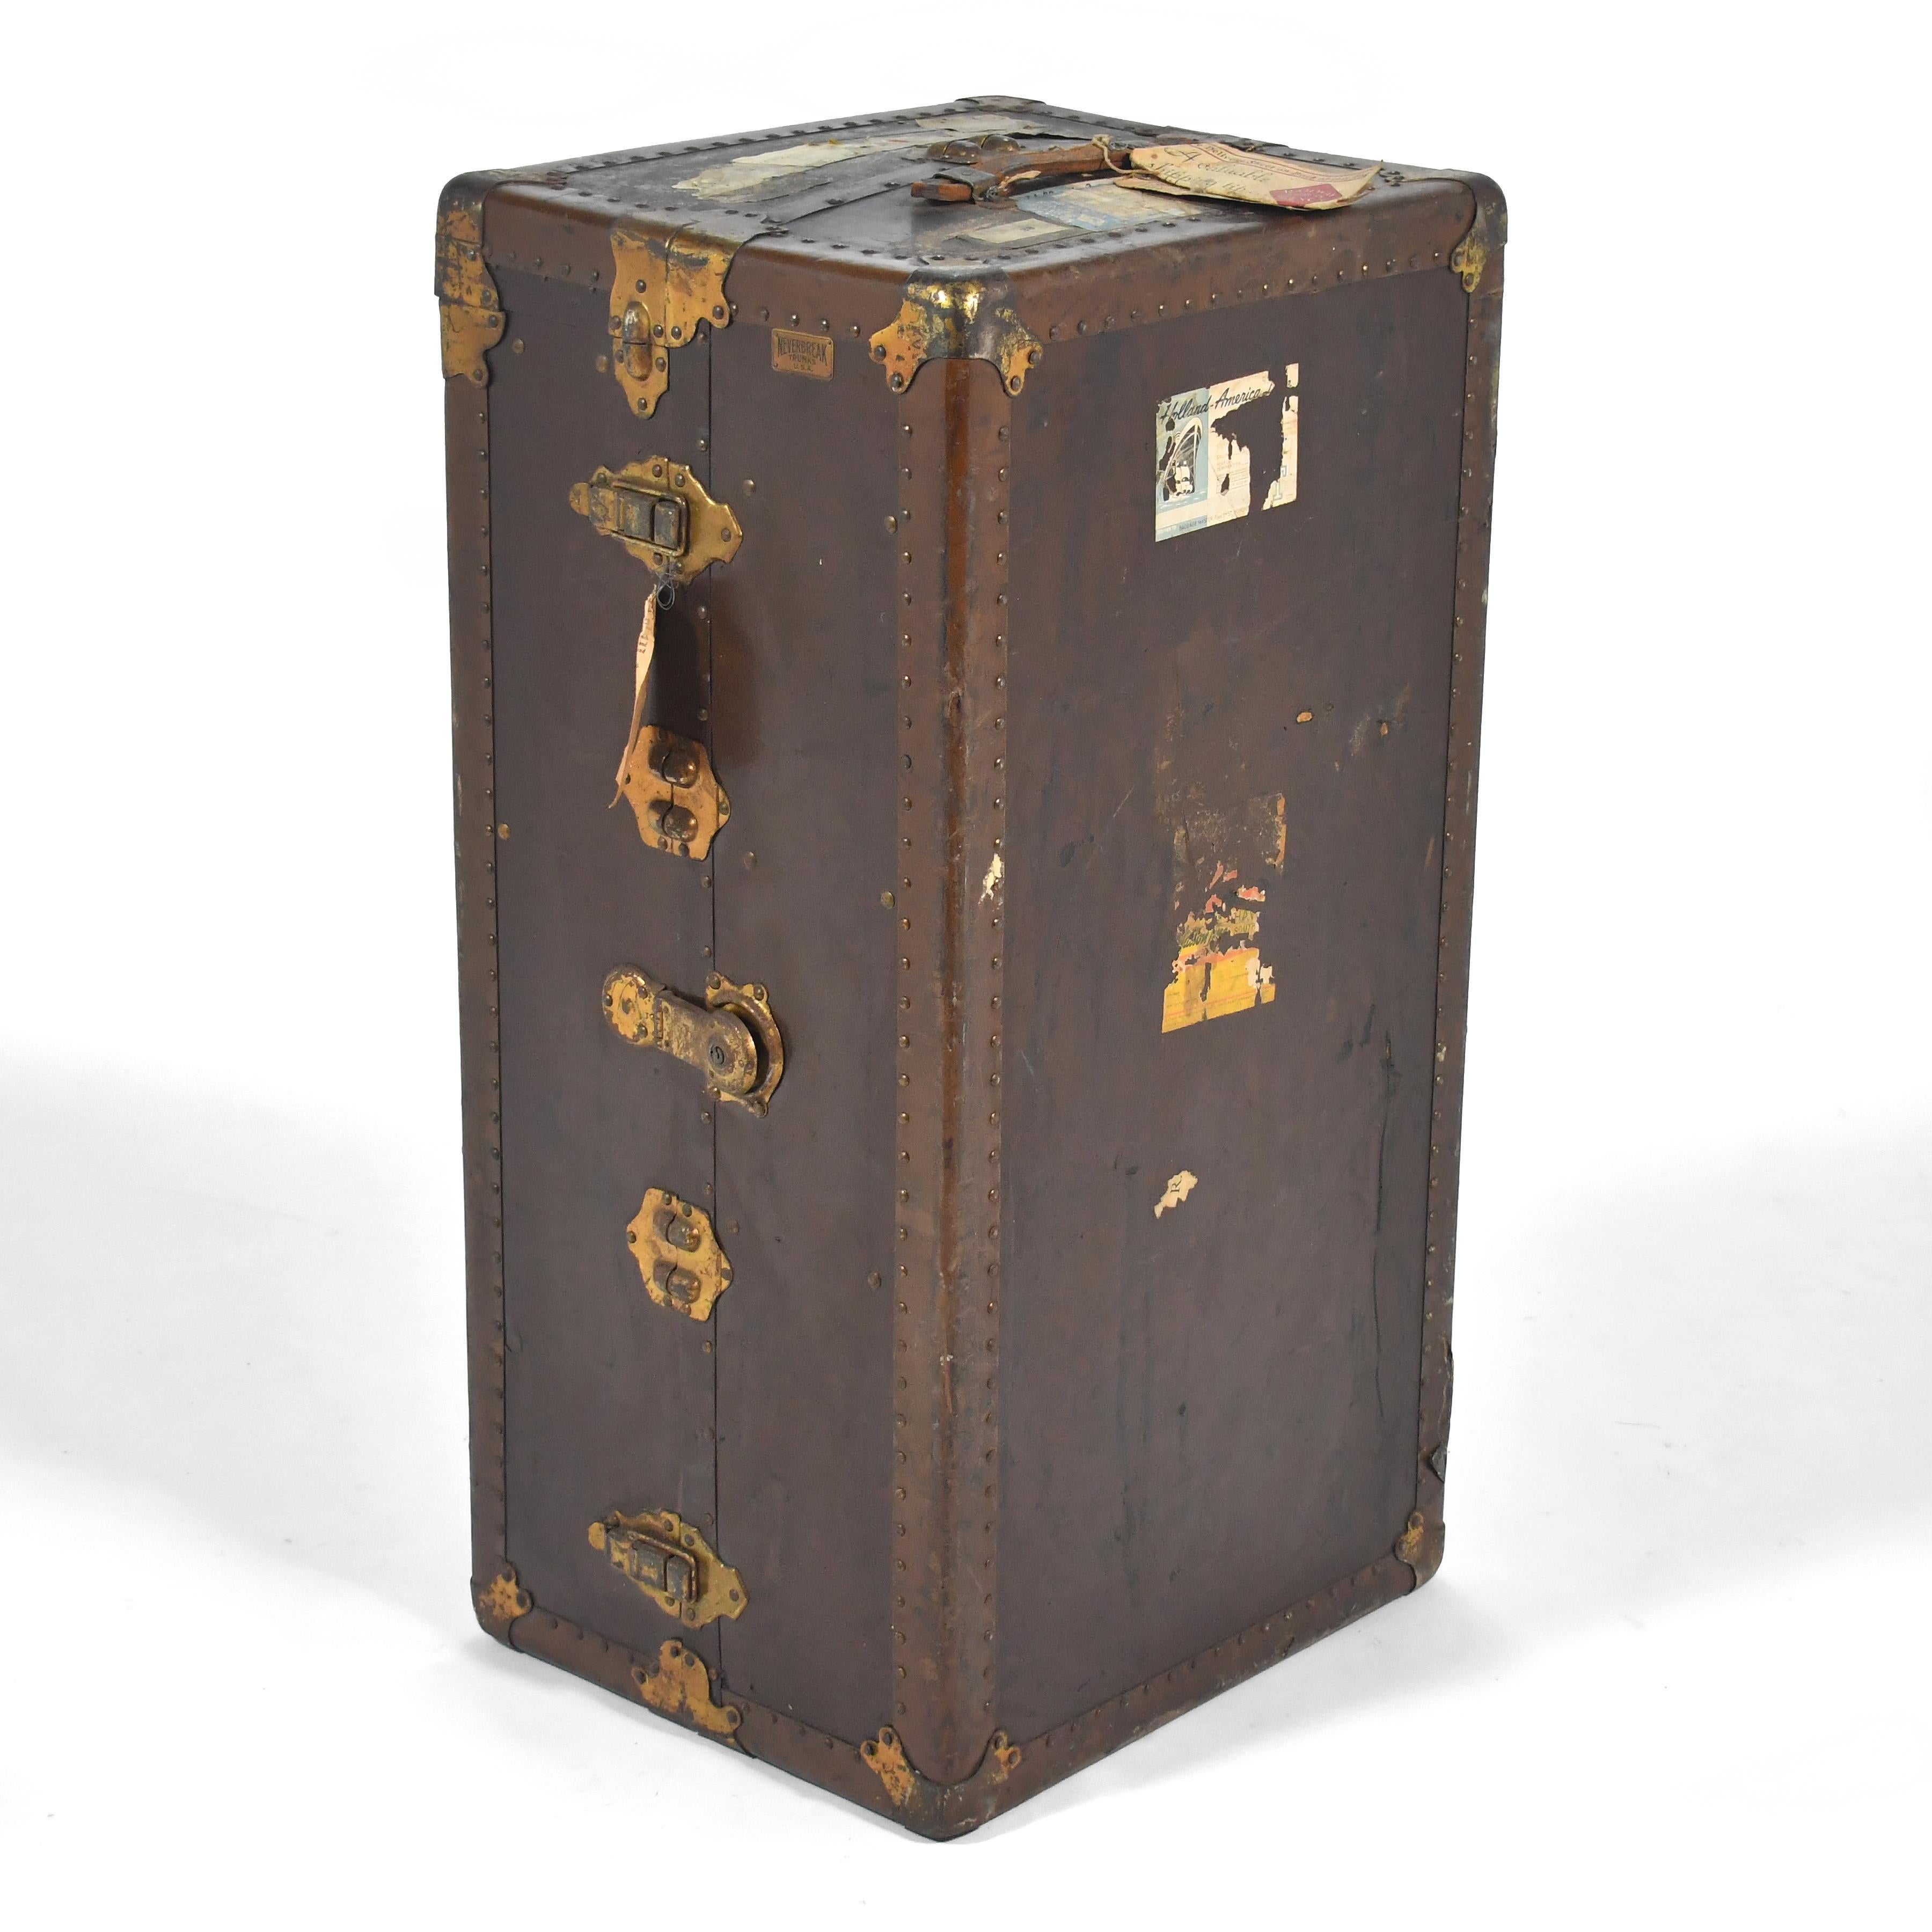 This beautiful steamer chest is from the early 20th century and is covered in history. It was made for Neverbreak Trunks U.S.A. by L. Goldsmith & Son of Newark, NJ and is covered with history.

It can of course be used for its intended purpose, but